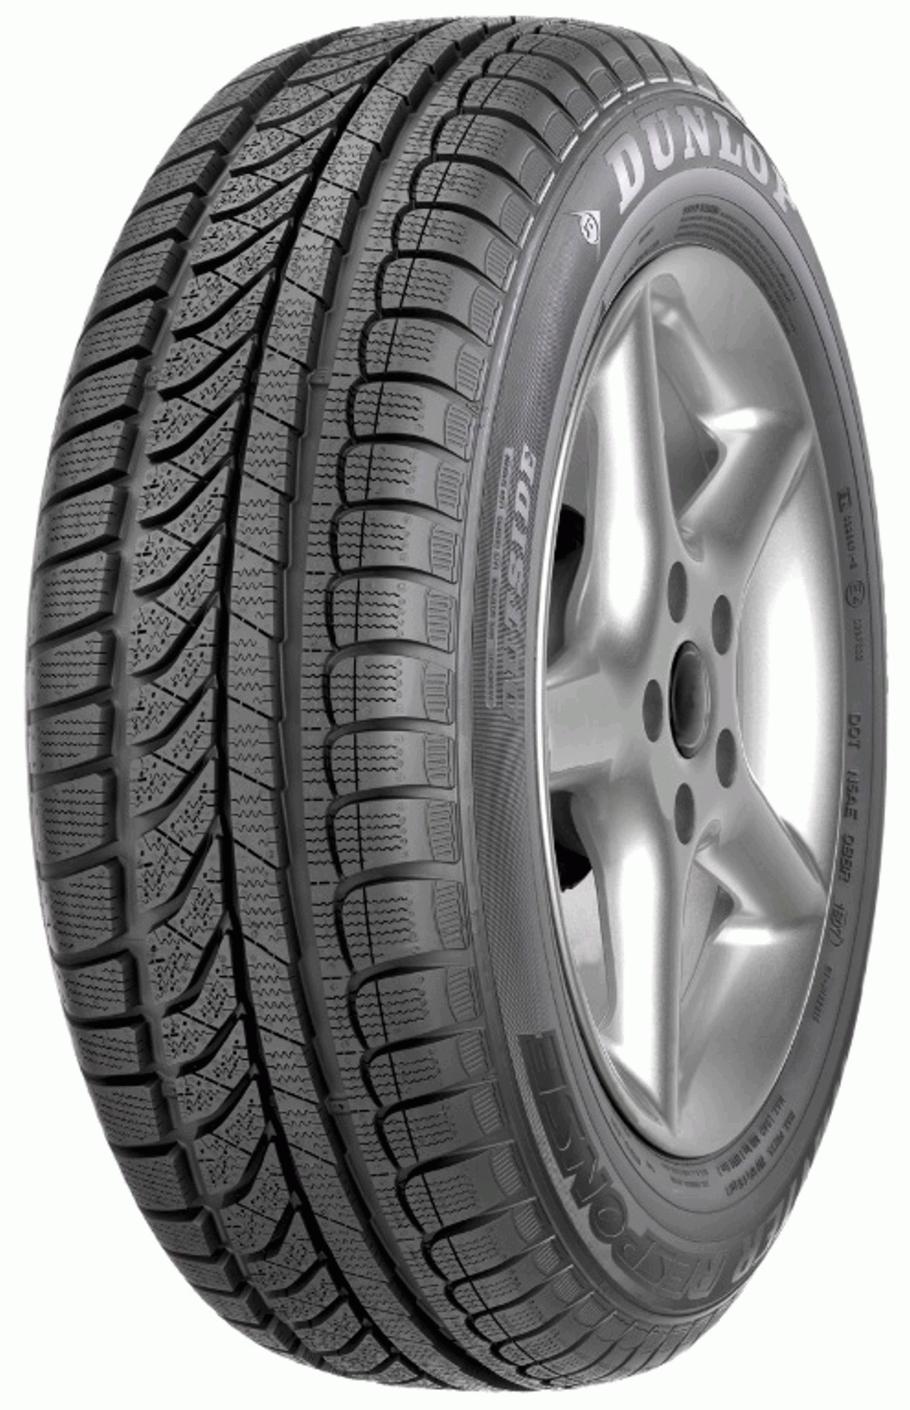 Dunlop SP and - Tyre Tests Reviews Winter Response